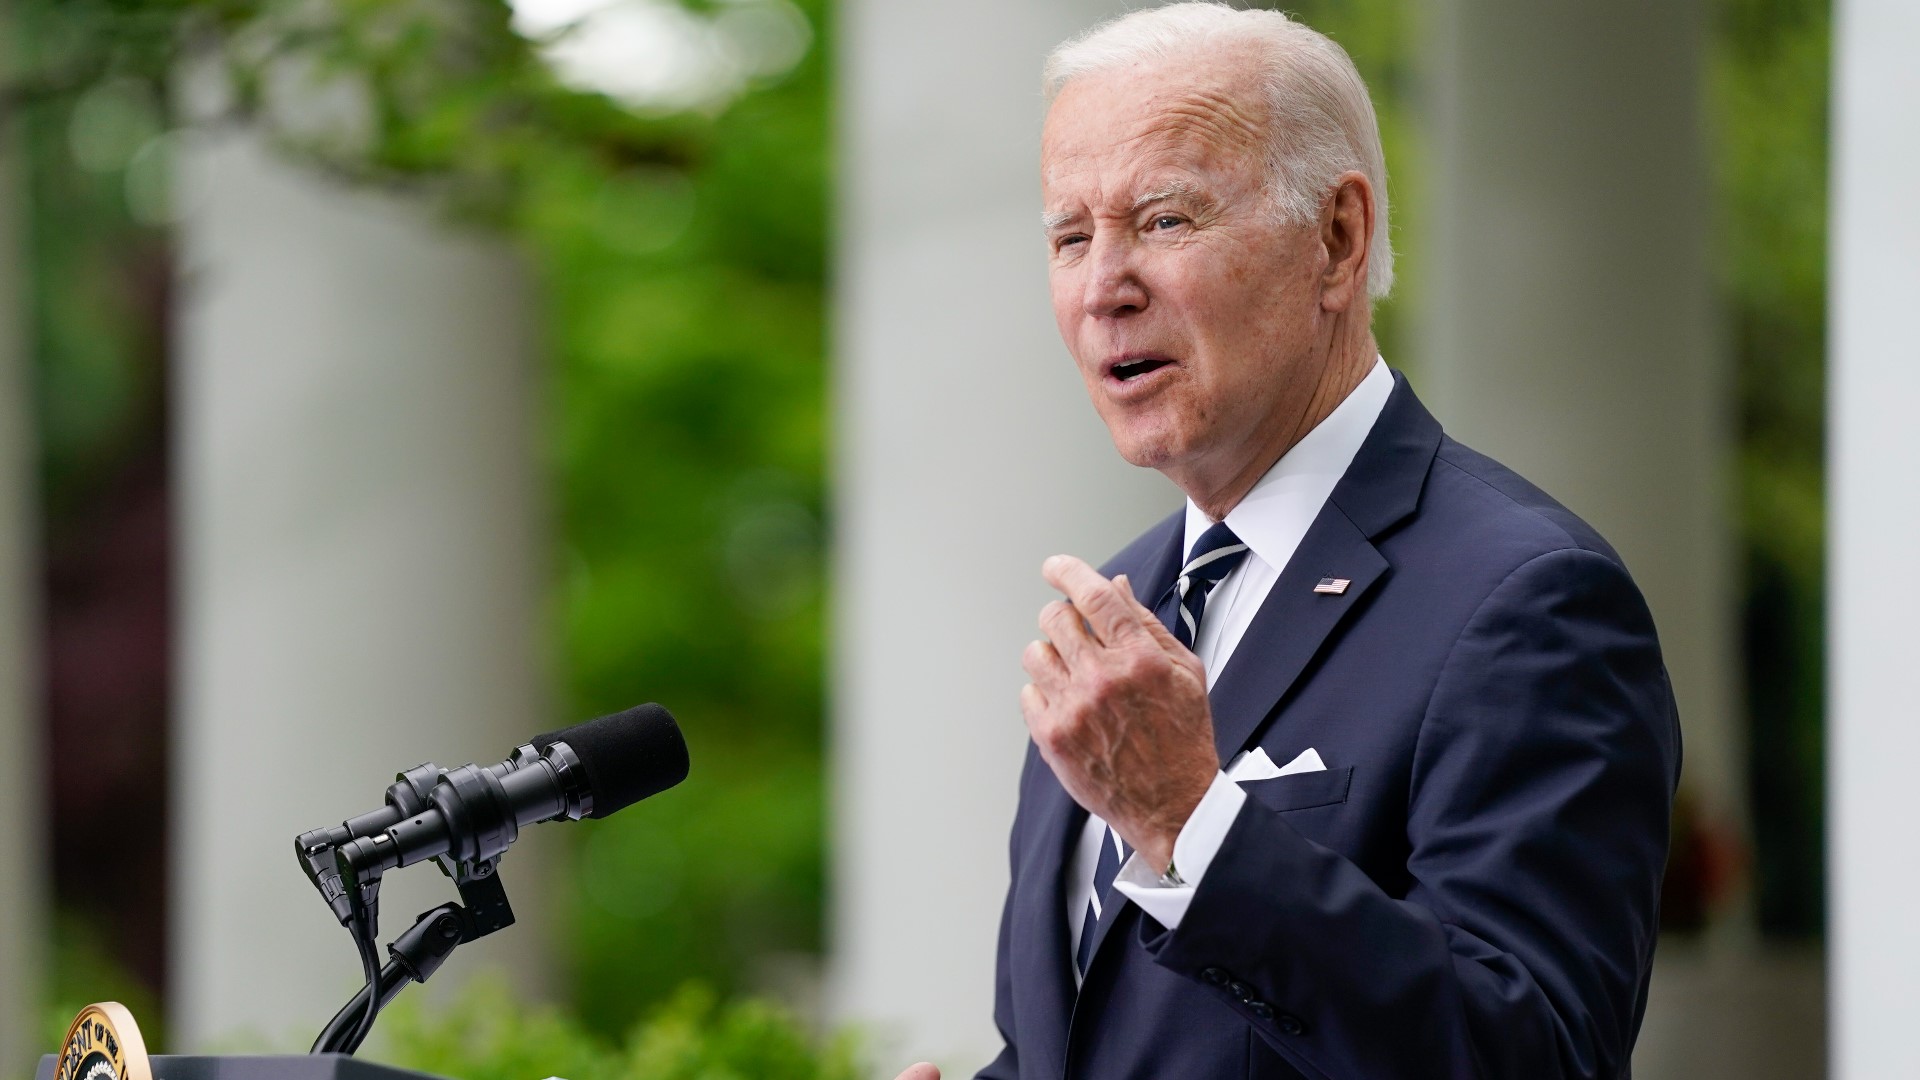 President Joe Biden announces that five major U.S. manufacturers have made commitments to boost their reliance on small and medium American firms for 3D printing